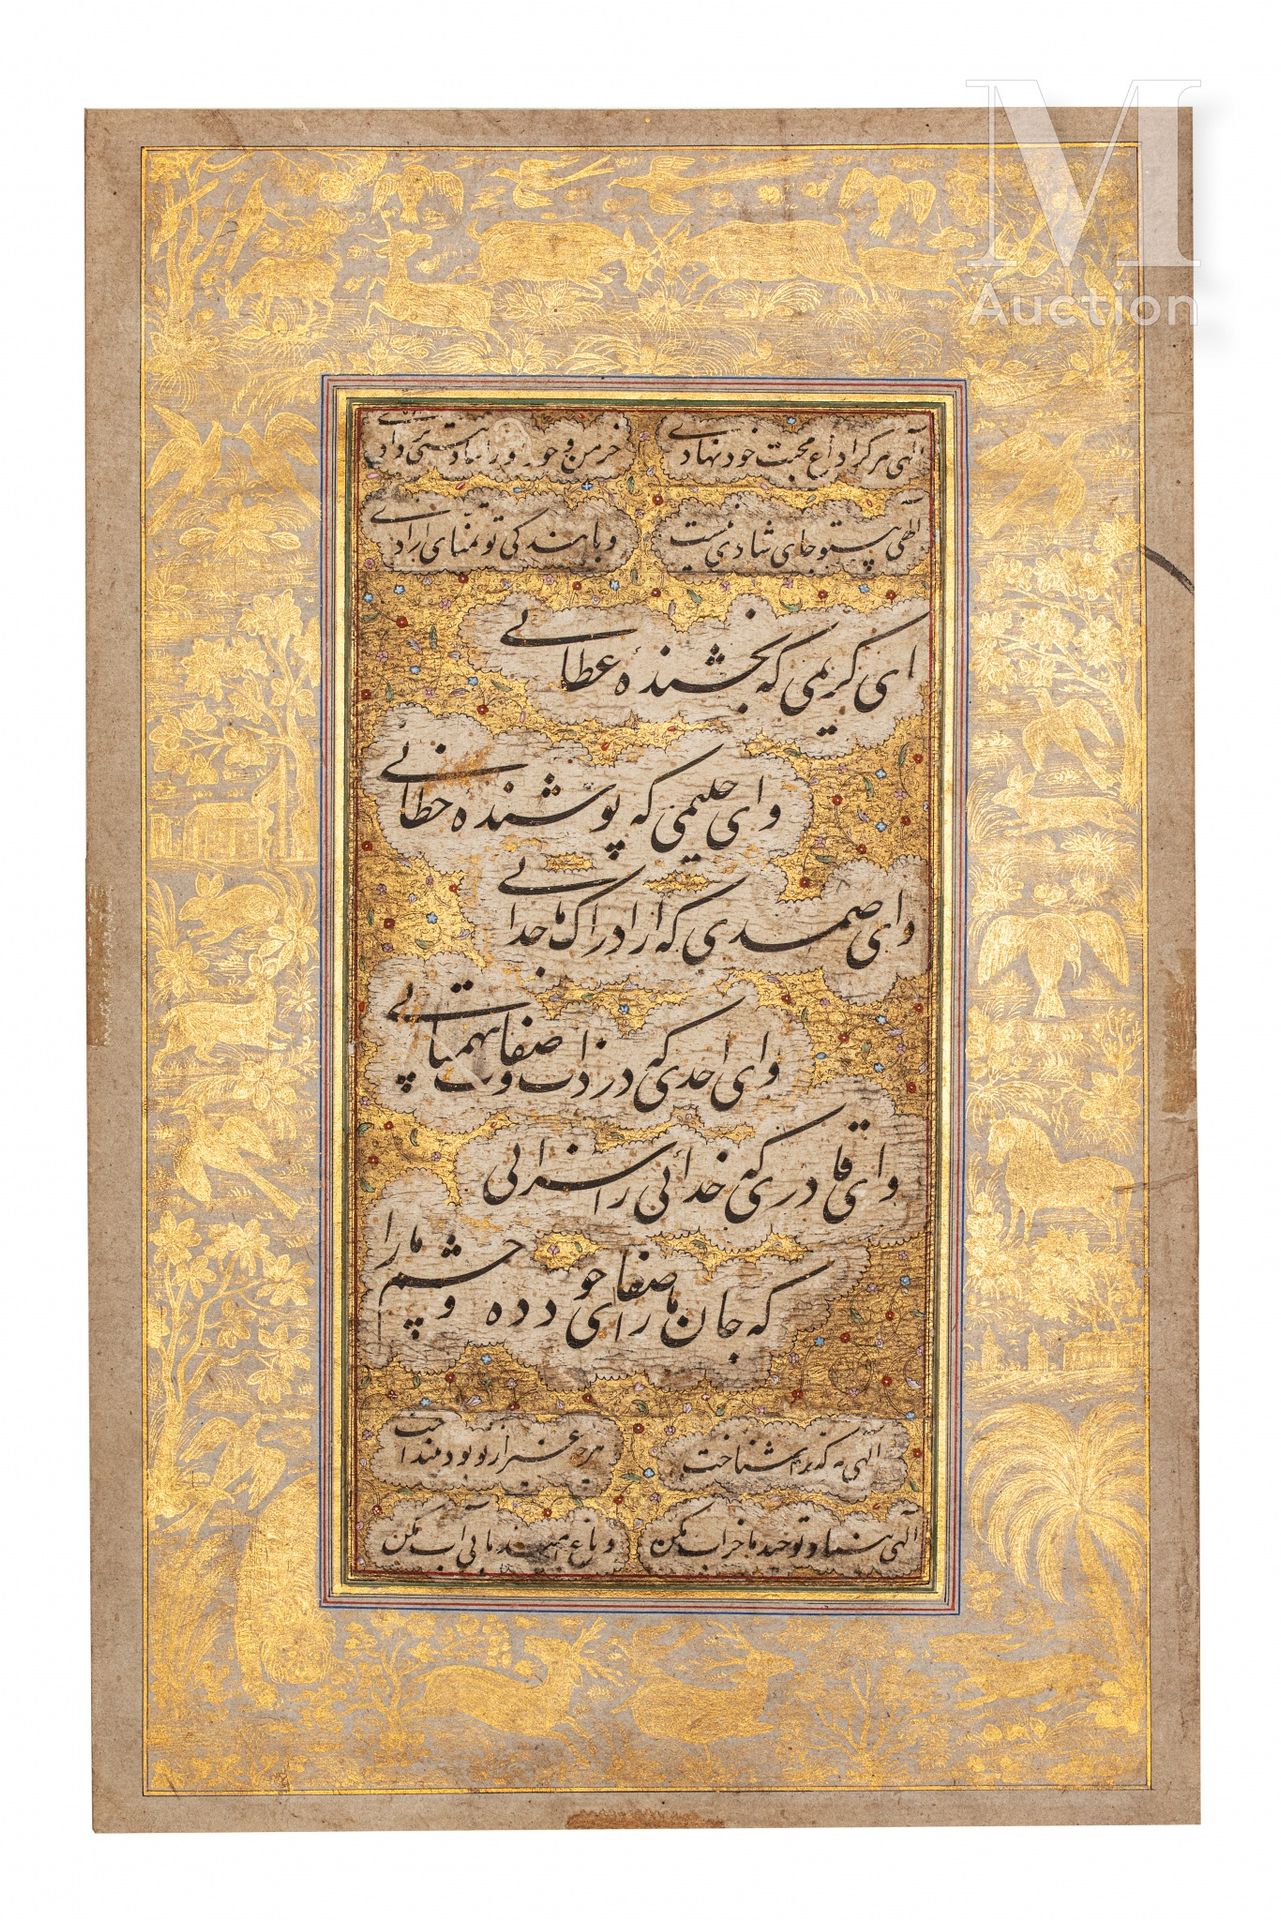 Calligraphie moghole India, 18th century

Album page, composed of calligraphy in&hellip;